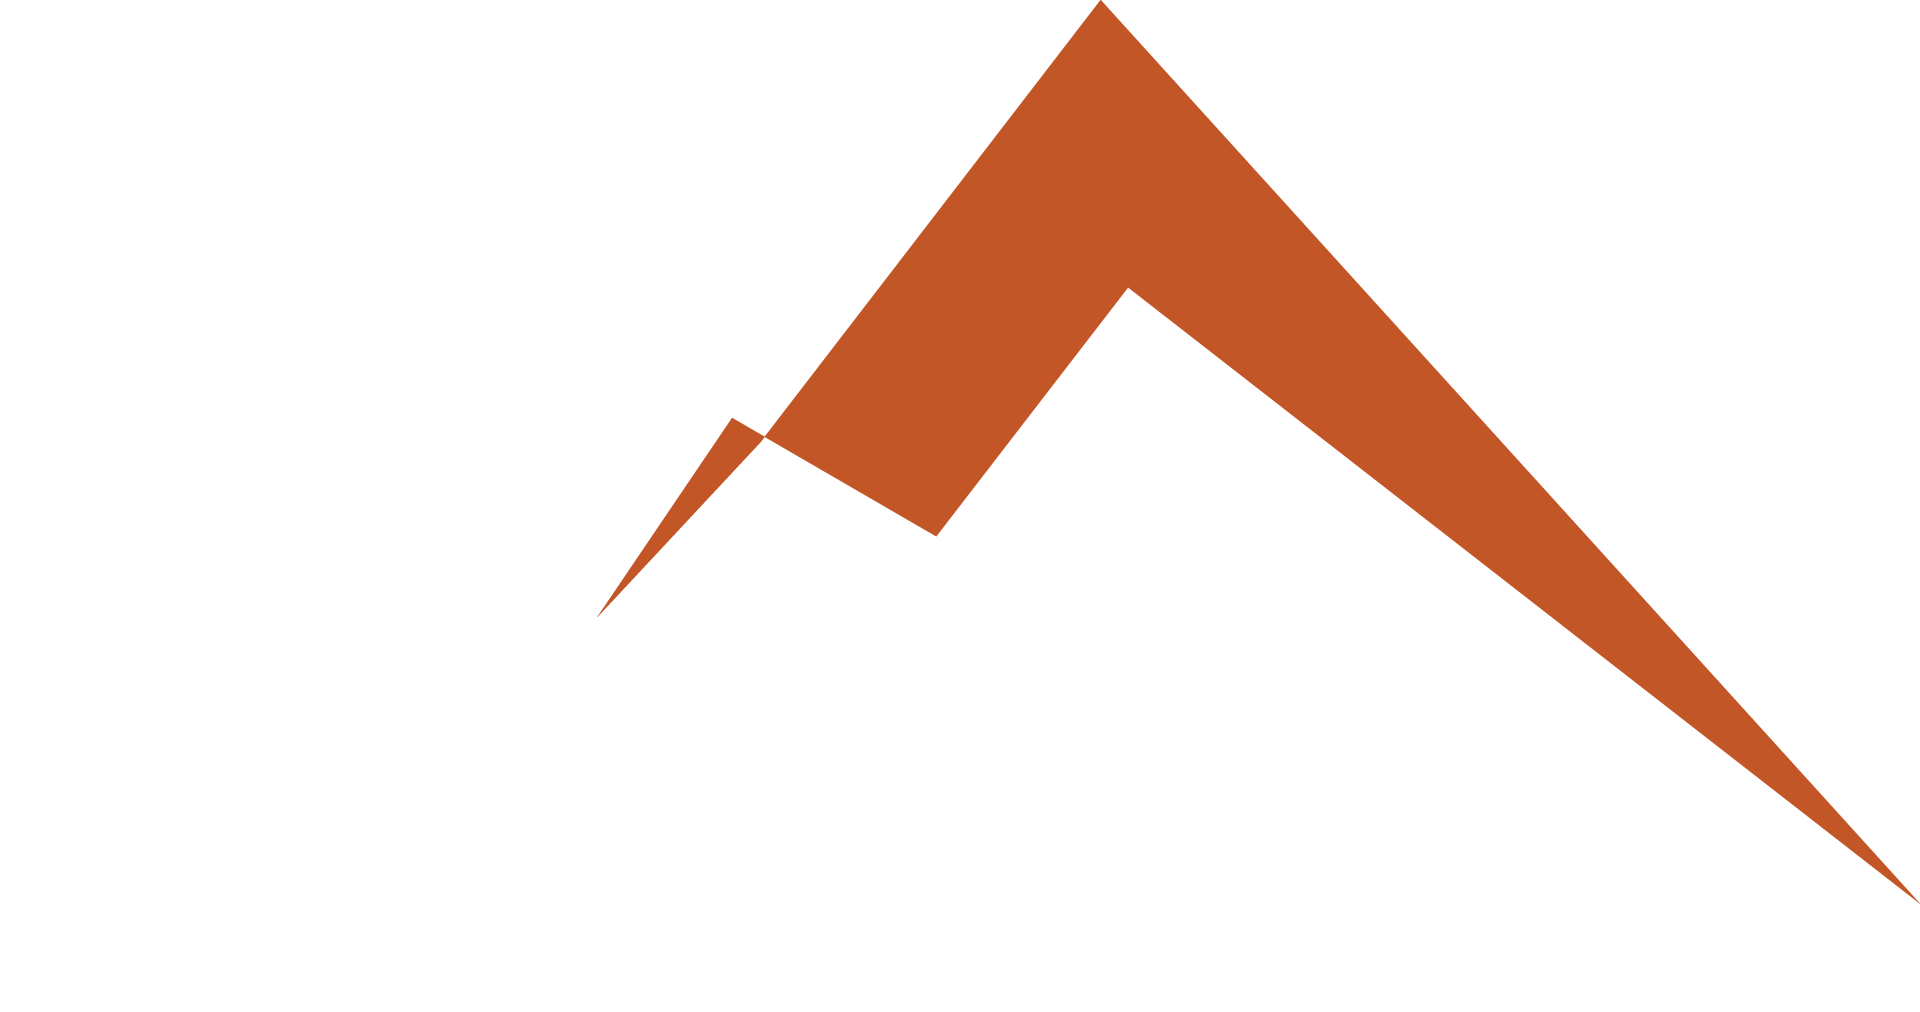 copperpoint logo